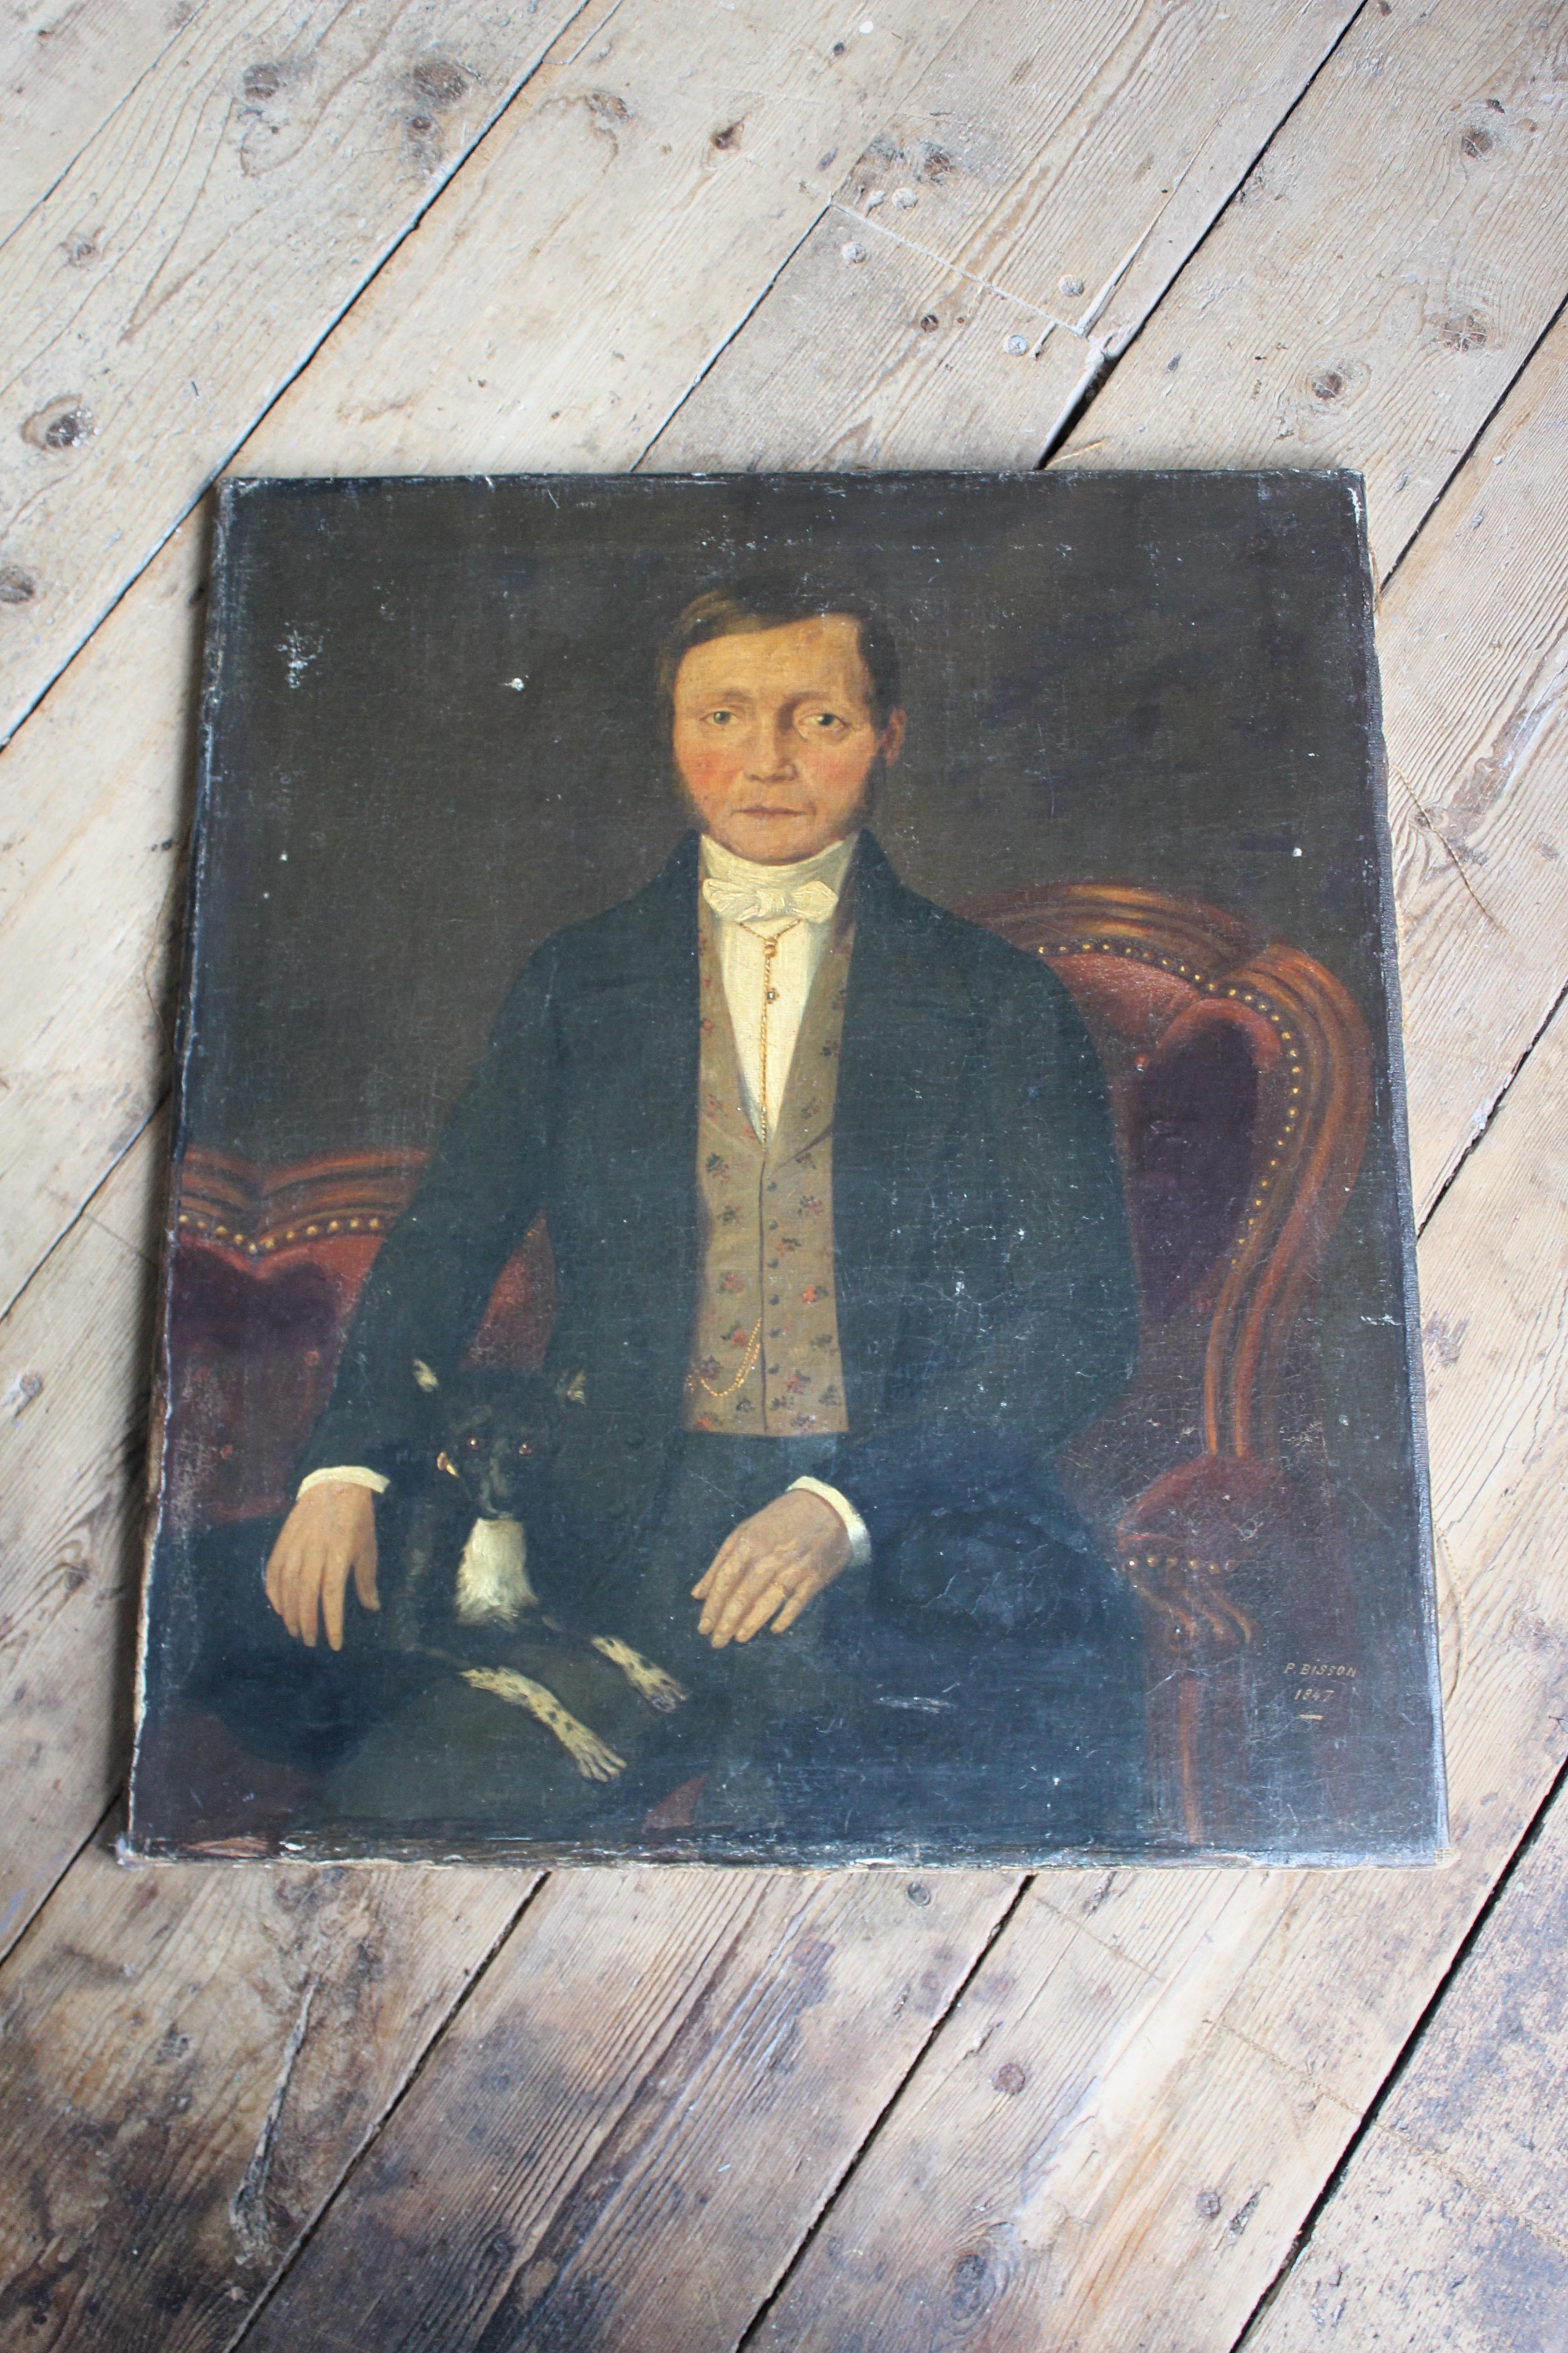 A charming mid 19th century French oil on canvas of a Gentleman and his doggy, dated 1847 and signed P.Bisson 

A small section of restoration under his left arm, but done some time ago and only noticeable on close inspection. A small hole just left